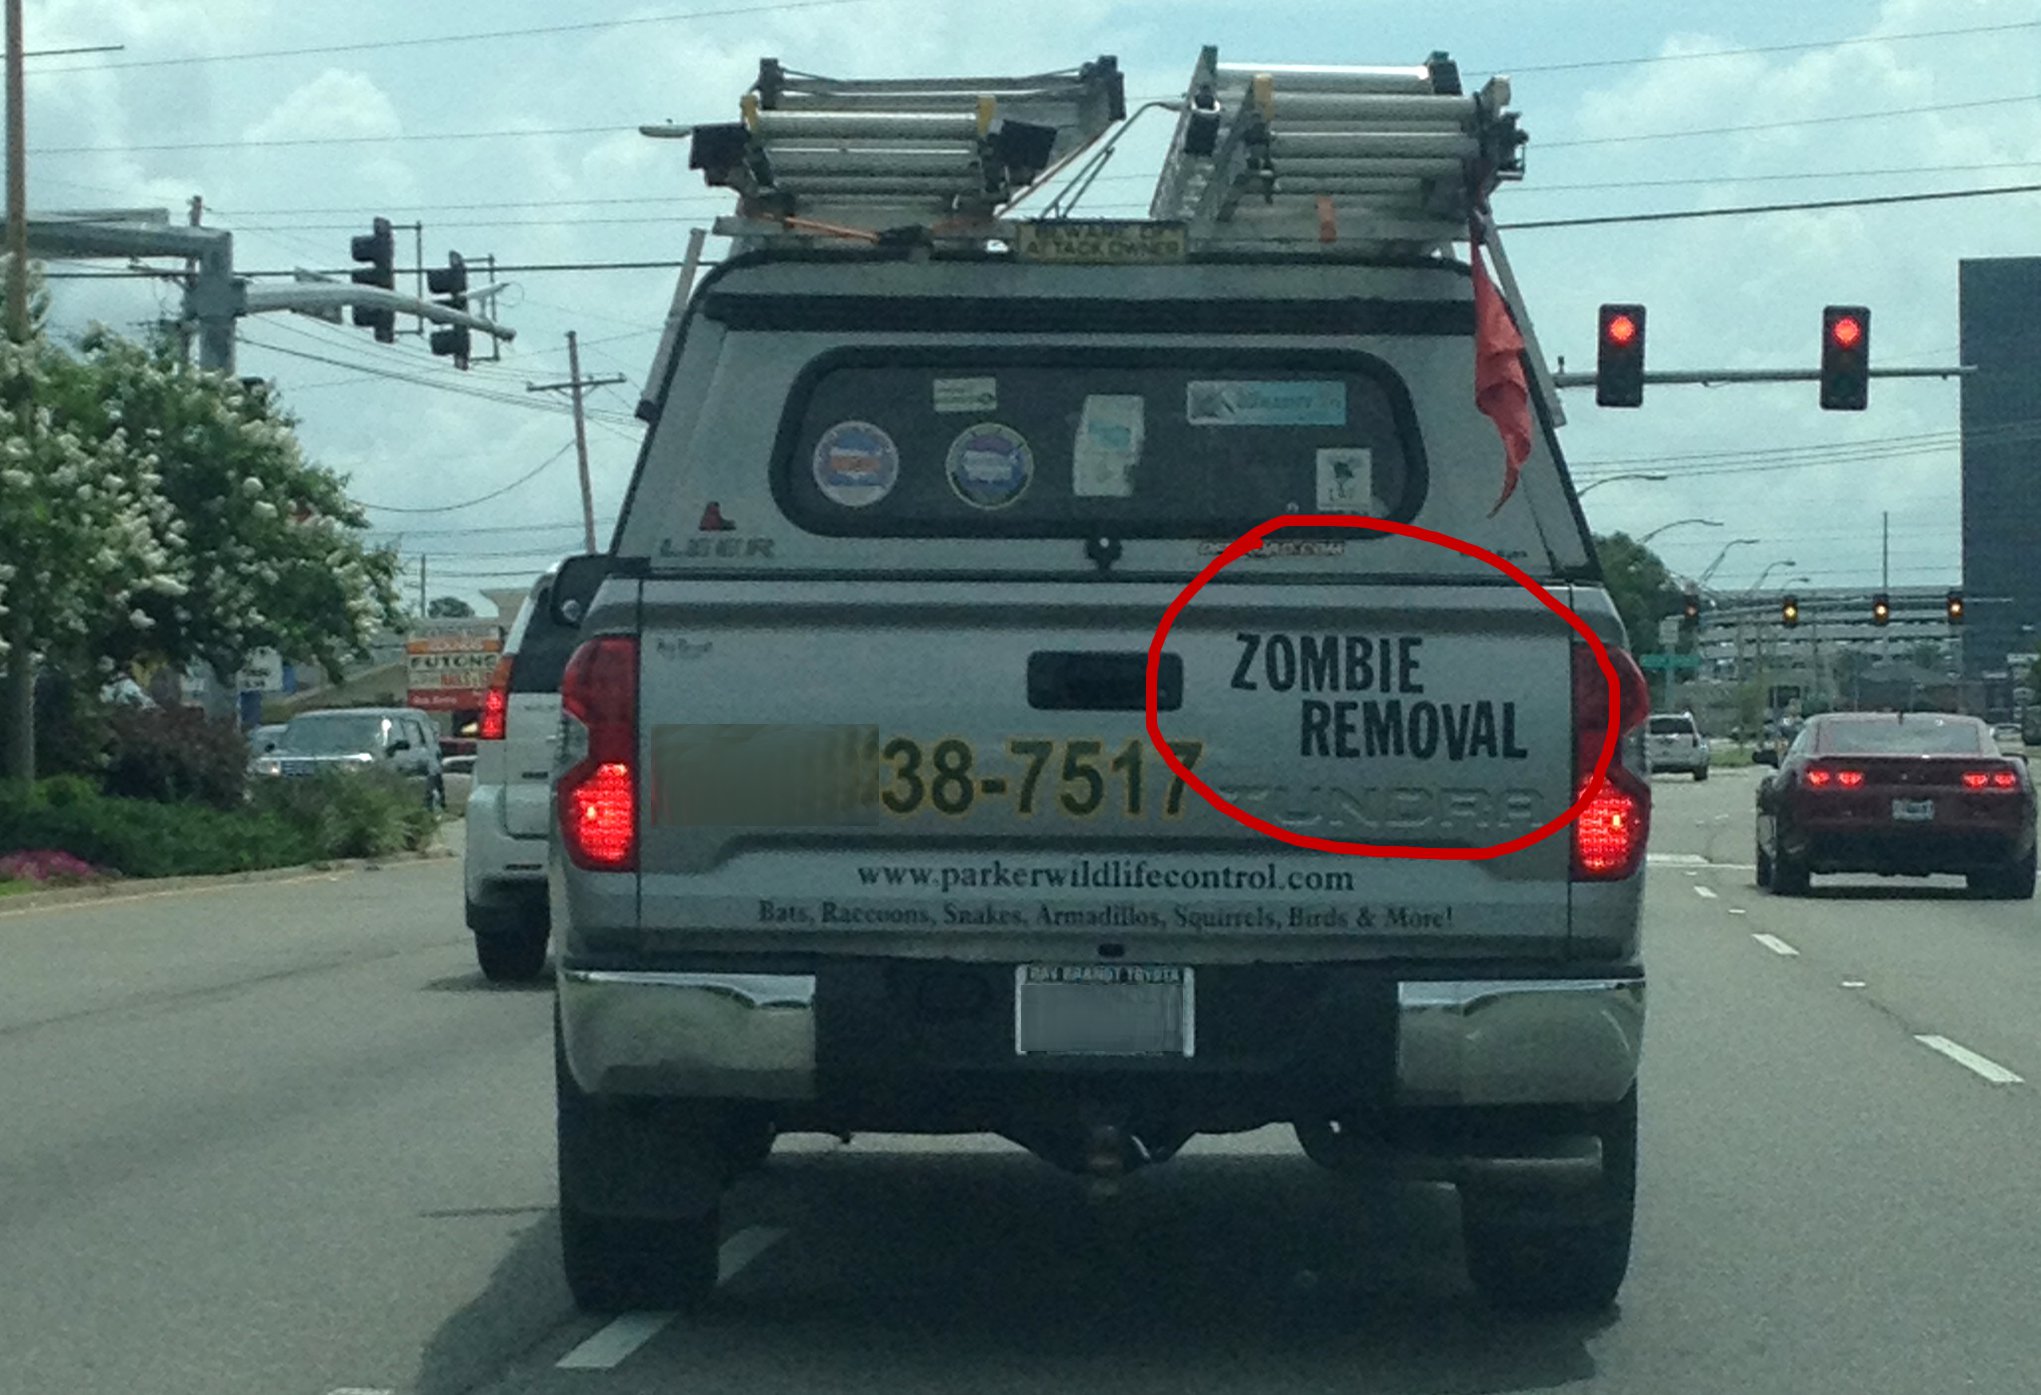 pickup truck - Ter Zombie Removal 387517 Bats, Raccoons, Snakes. Armadillos, Squirtels, Bads & More!